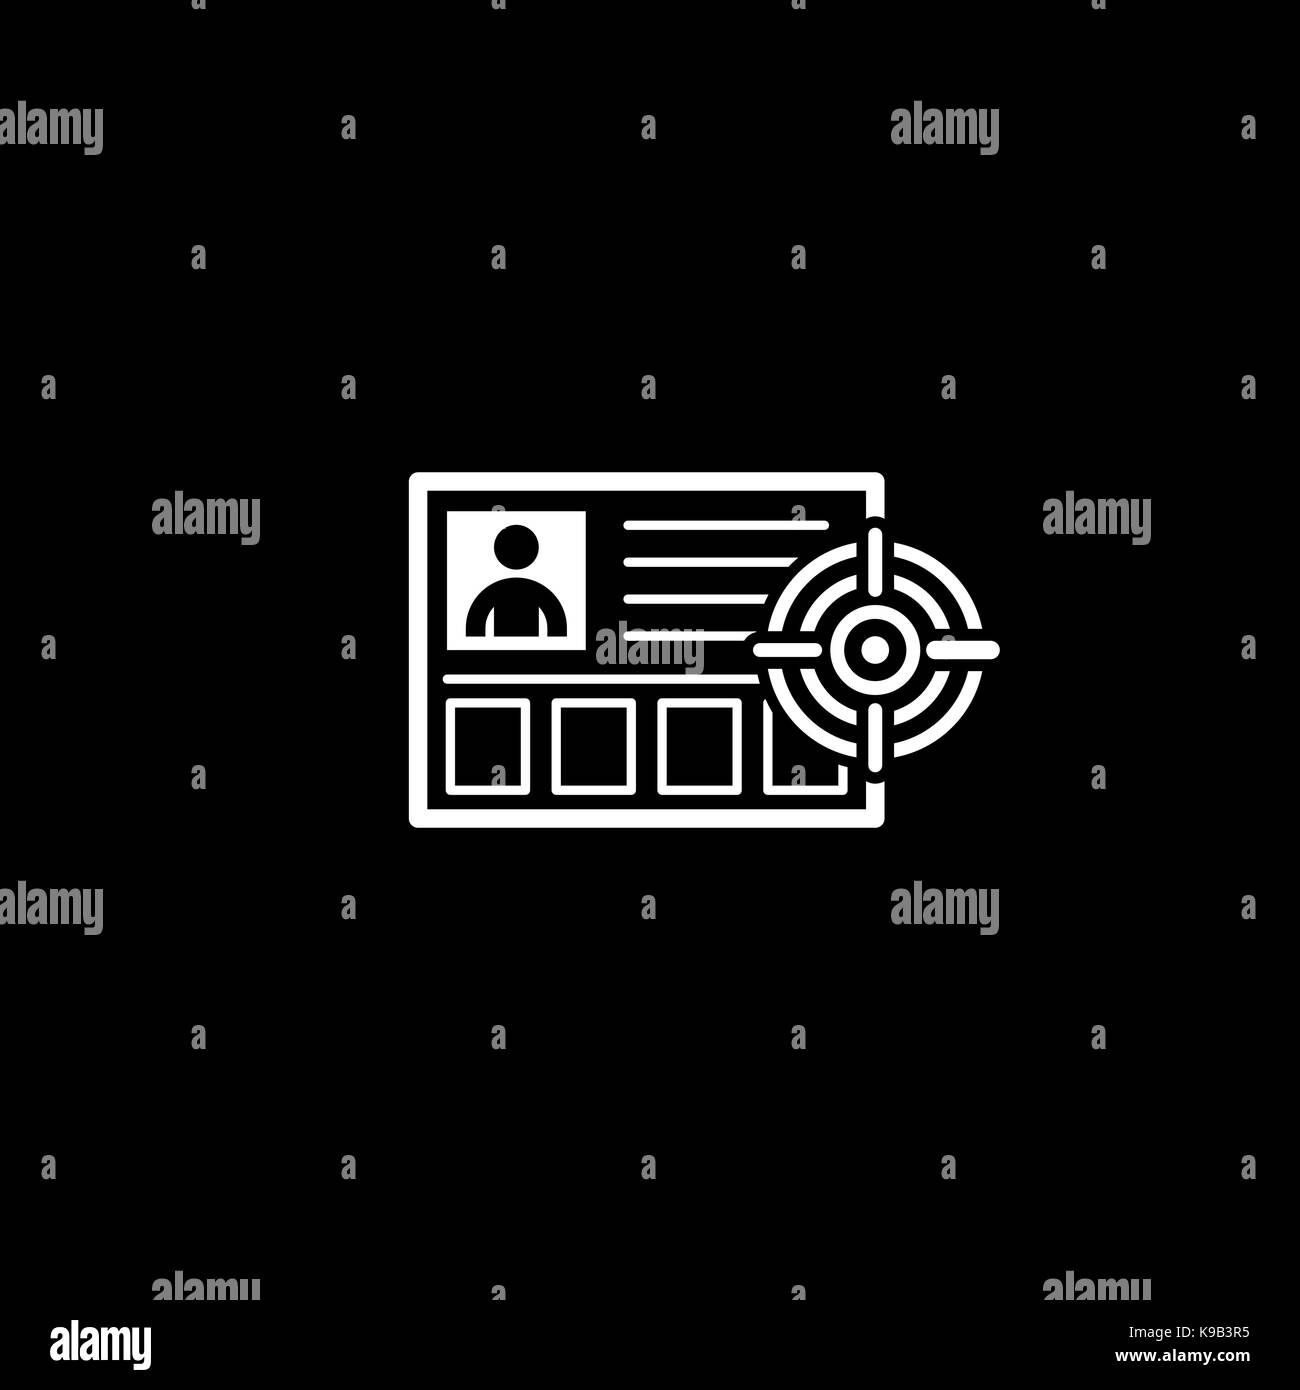 Headhunting Icon. Business Concept. Flat Design Isolated Illustration Stock Vector